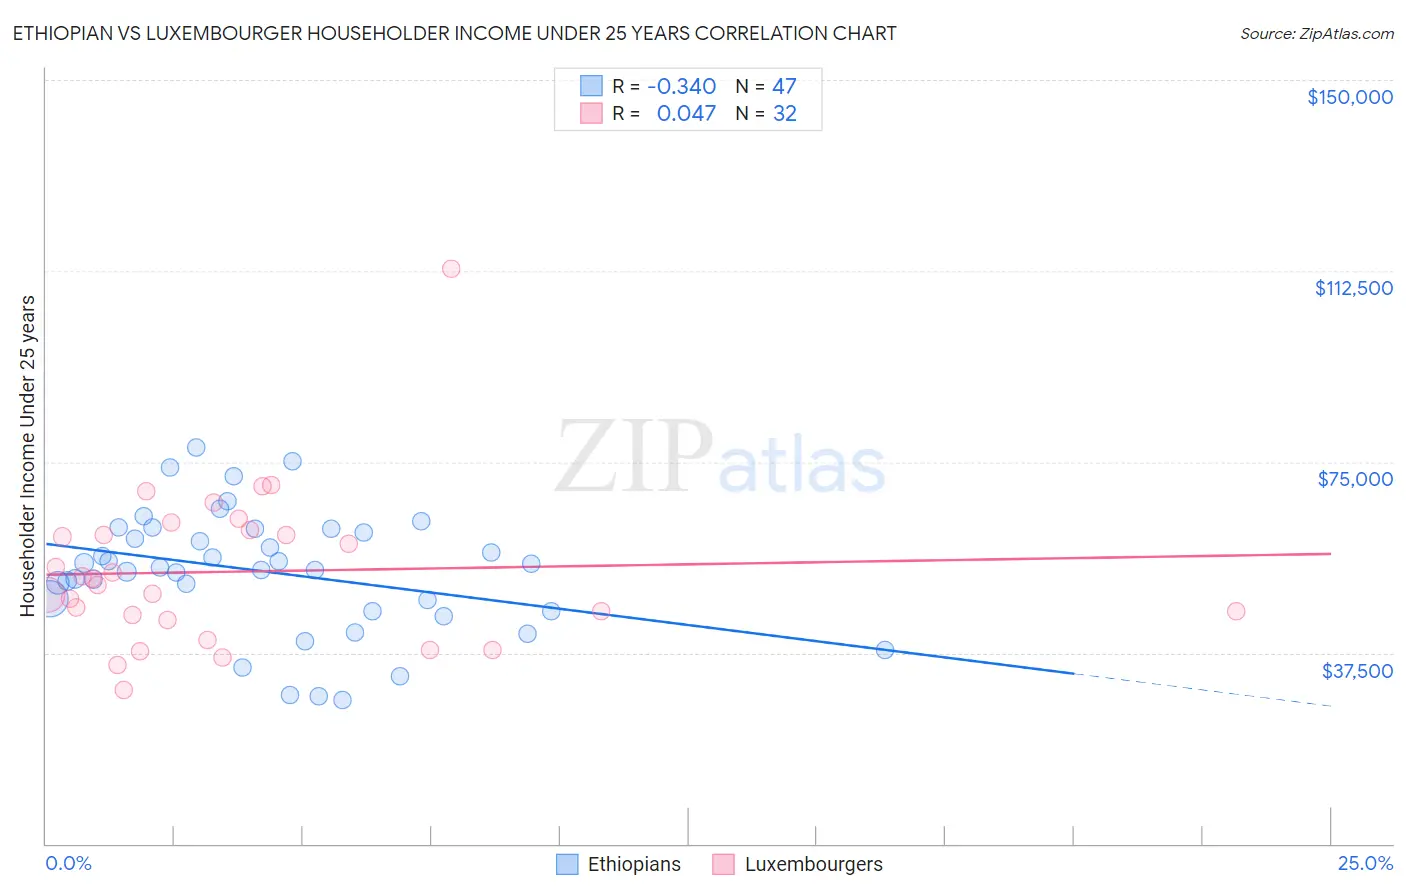 Ethiopian vs Luxembourger Householder Income Under 25 years